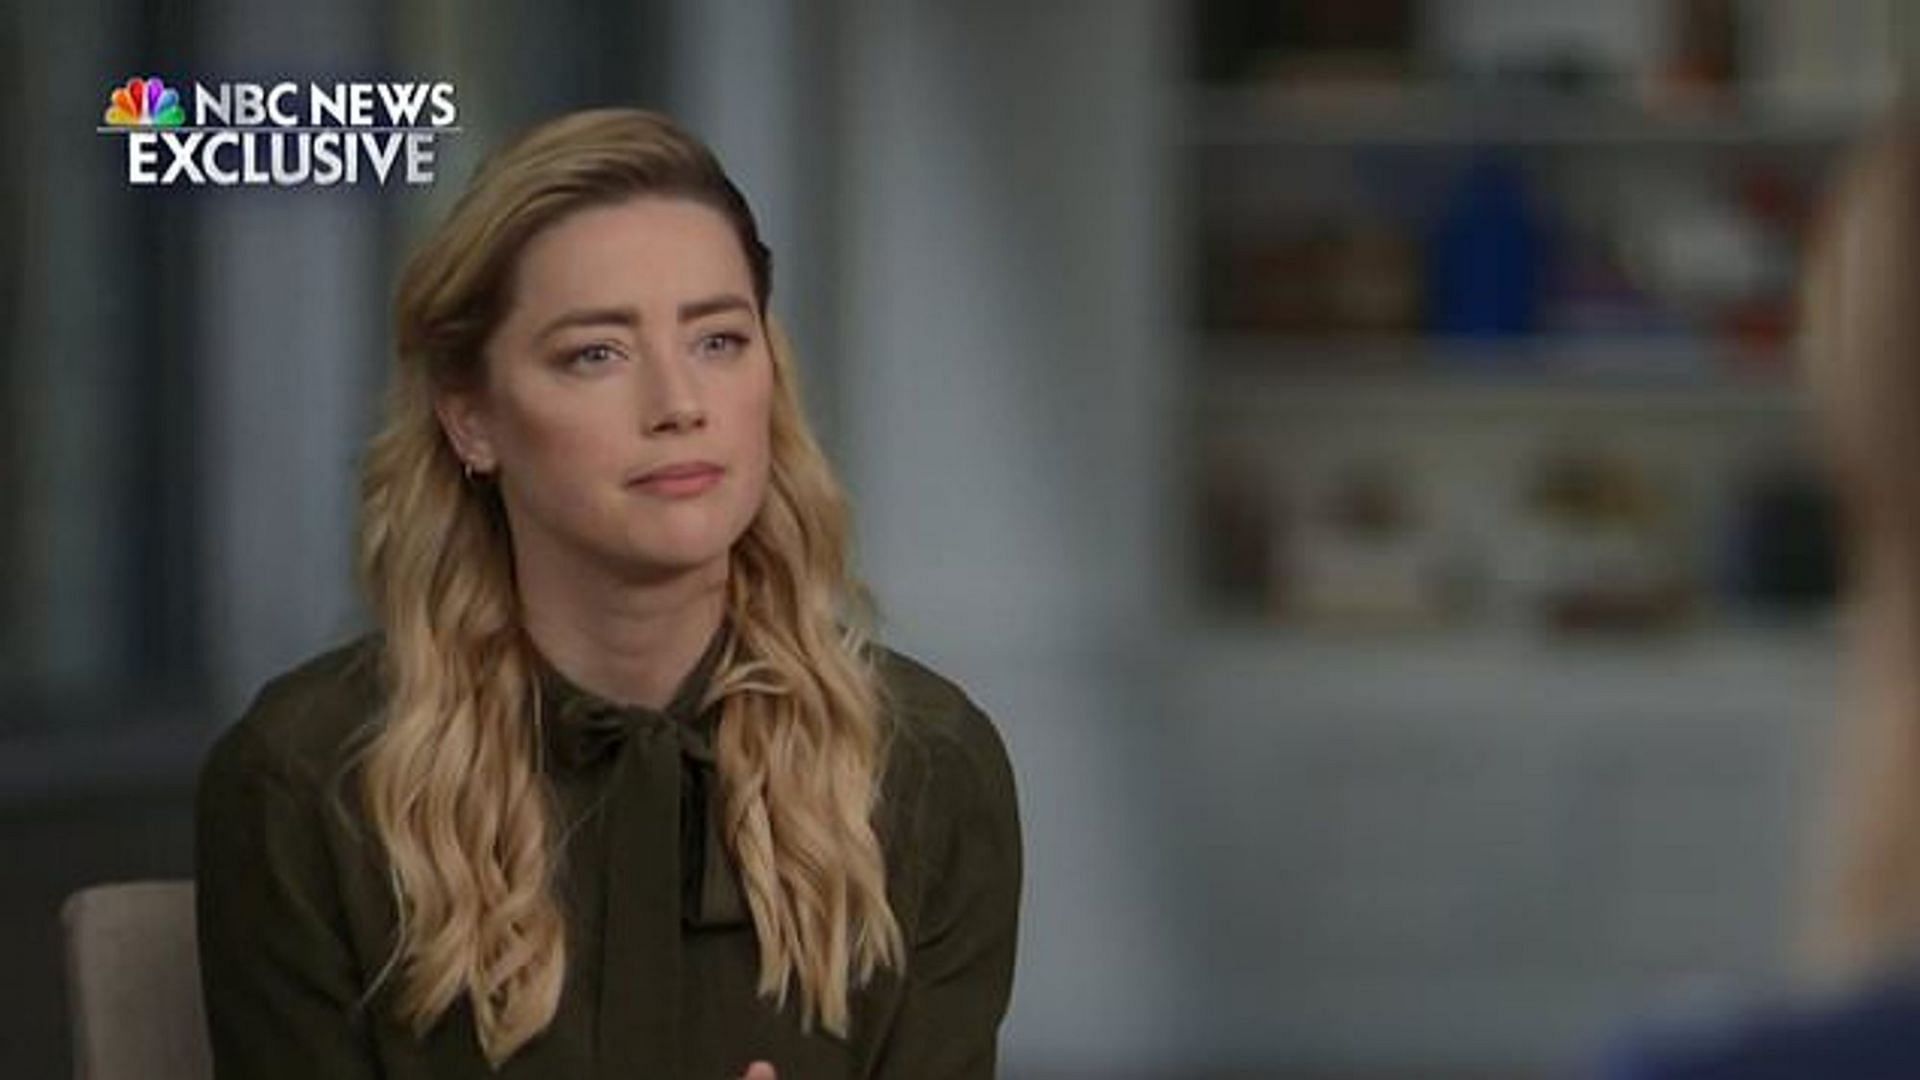 Netizens slam Amber Heard for appearing in exclusive NBC interview following legal loss (Image via NBC)